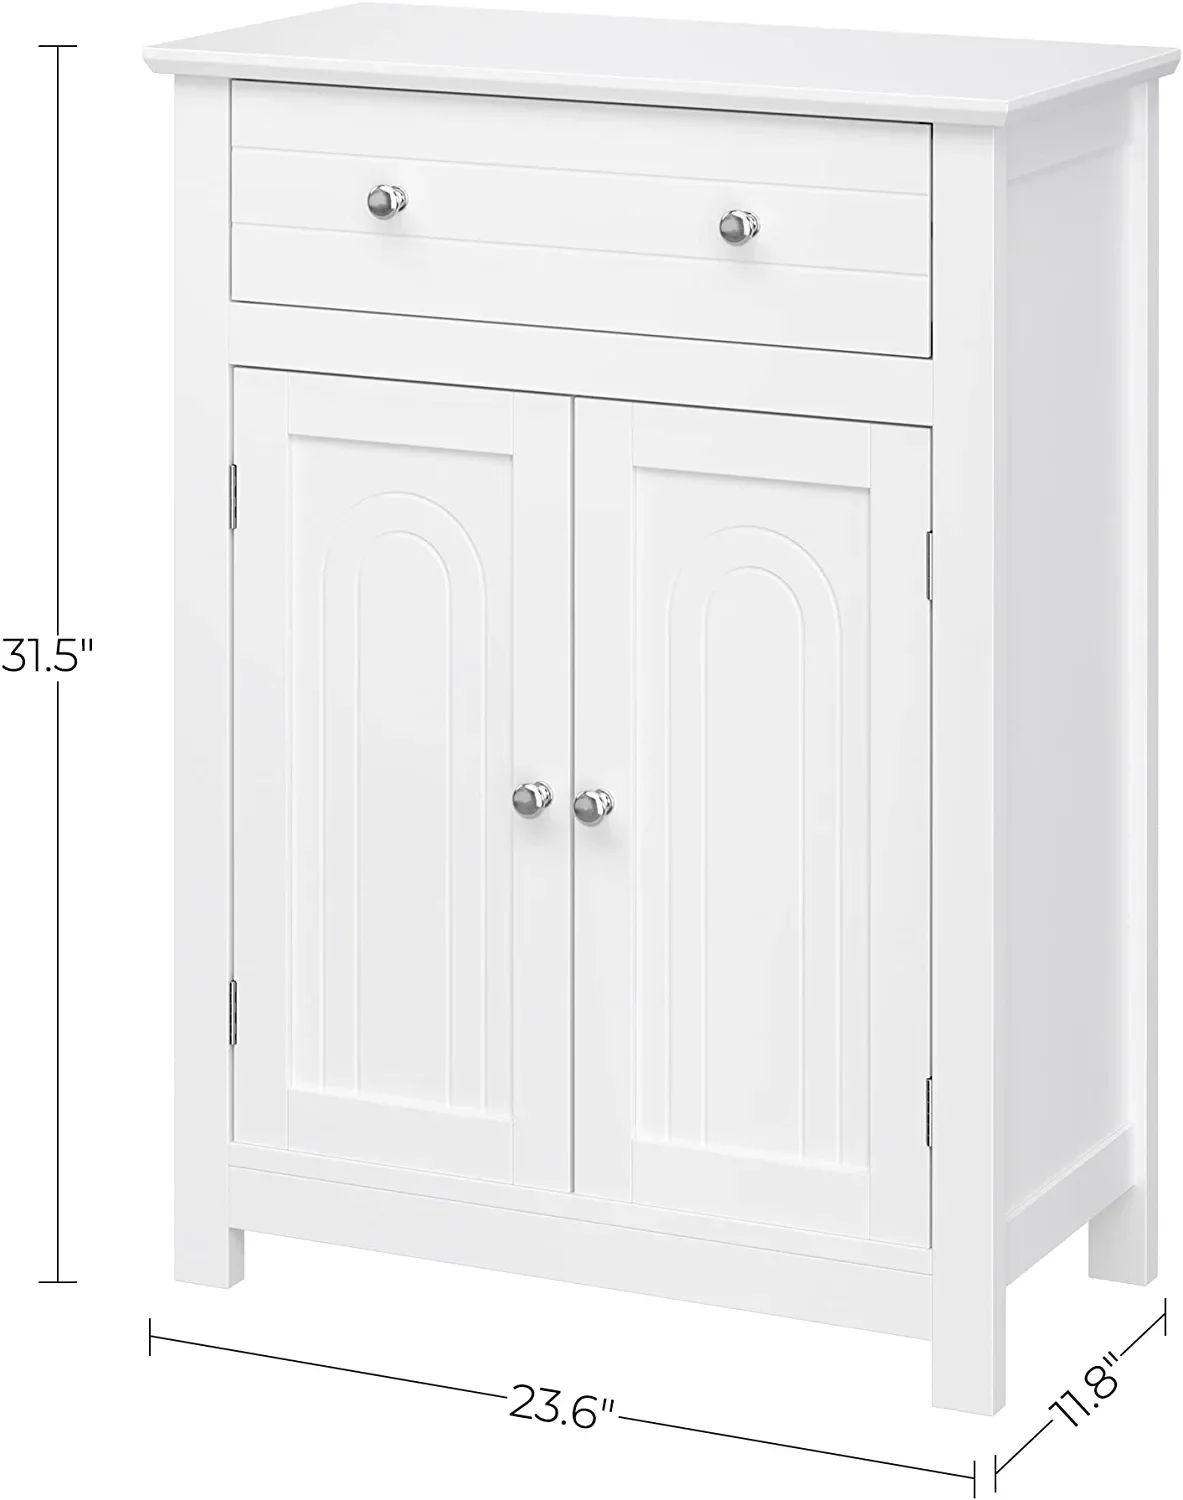 Wooden Bathroom Storage Cabinet Free Standing With Drawer And ...